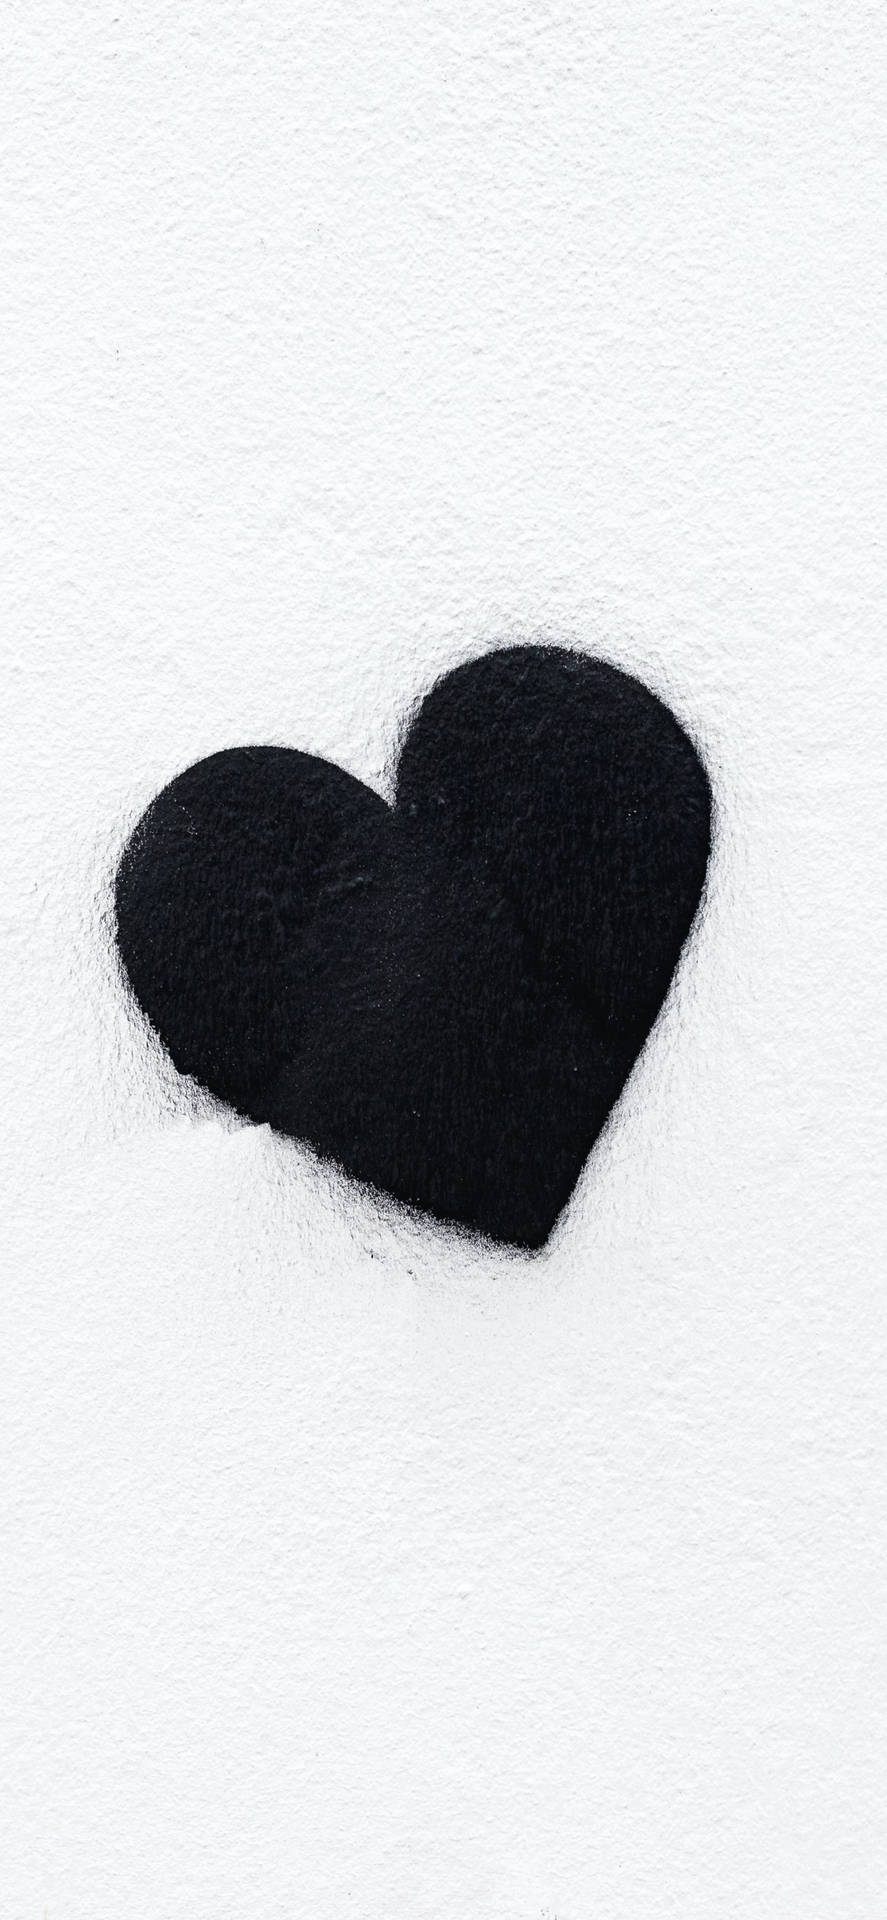 Black Heart Aesthetic Painted On A Wall Wallpaper